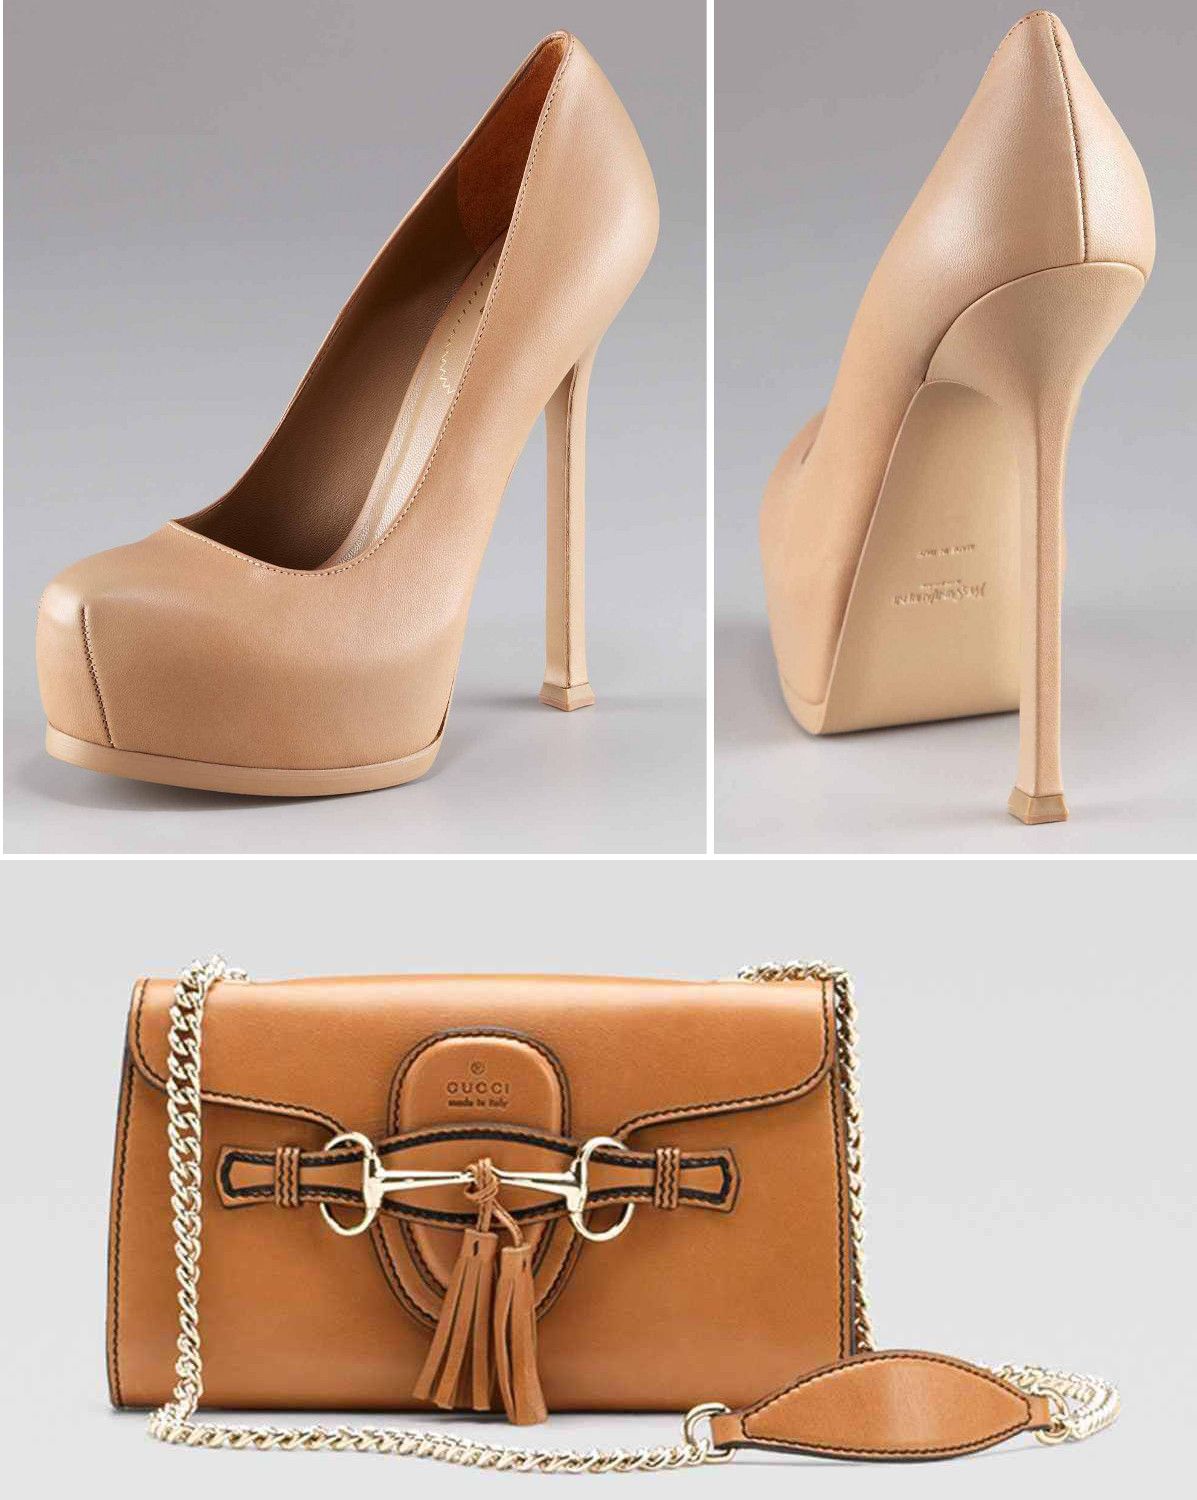 Yves Saint Laurent 'Tribtoo' pumps (top) and Gucci 'Emily' chain shoulder bag (Photo courtesy | Neiman Marcus)